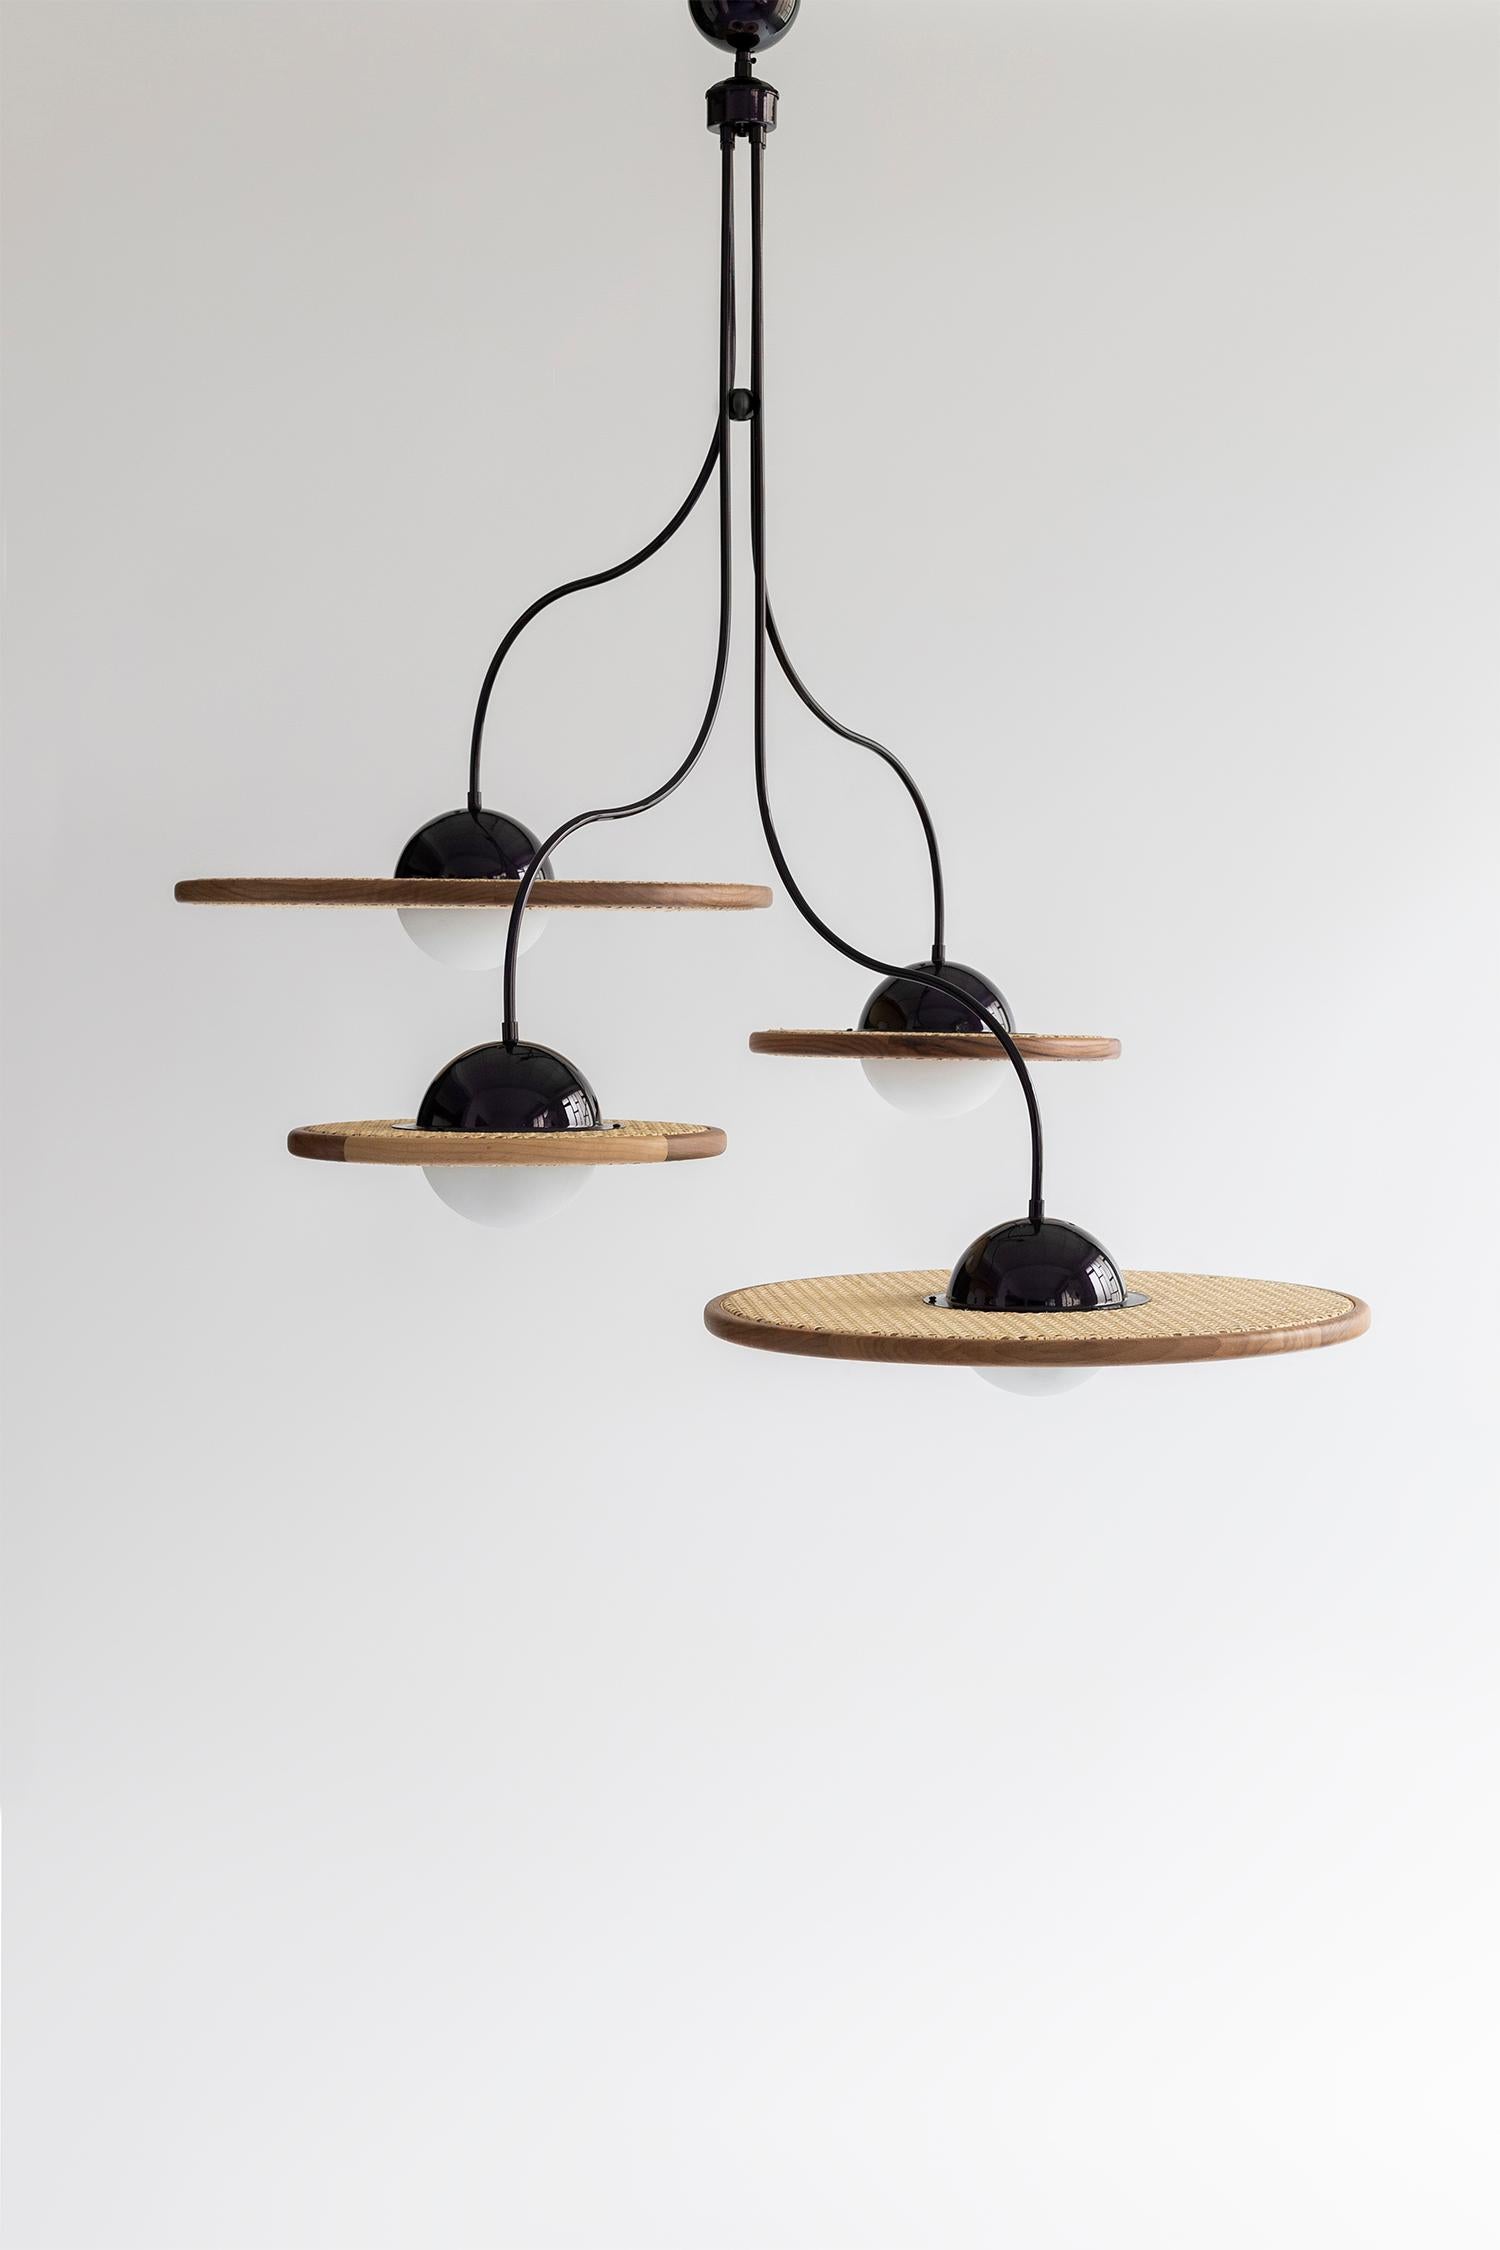 Cassini lamps are named after the famous “Cassini–Huygens” mission which was a collaboration between NASA, the European Space Agency (ESA) and the Italian Space Agency (ASI) to send a probe to study the planet Saturn and its system. Cassini-Huygens